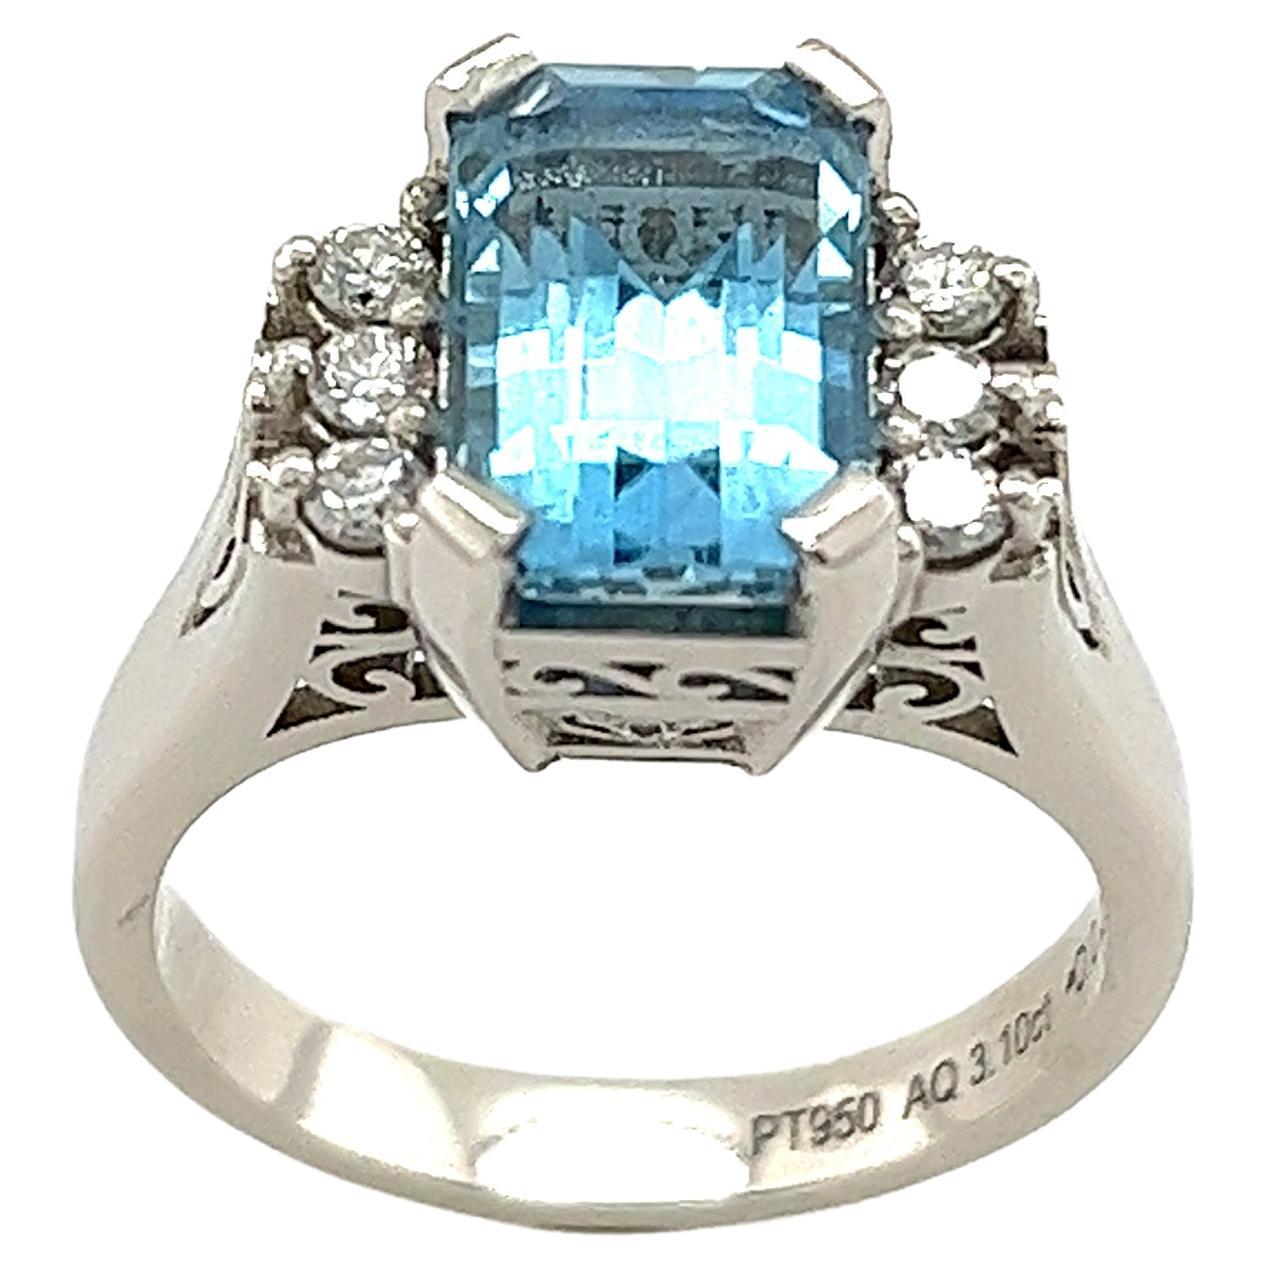 Triple AAA Emerald Cut 3.10ct Aquamarine Ring w/ 3 Diamonds on Sides in Platinum For Sale